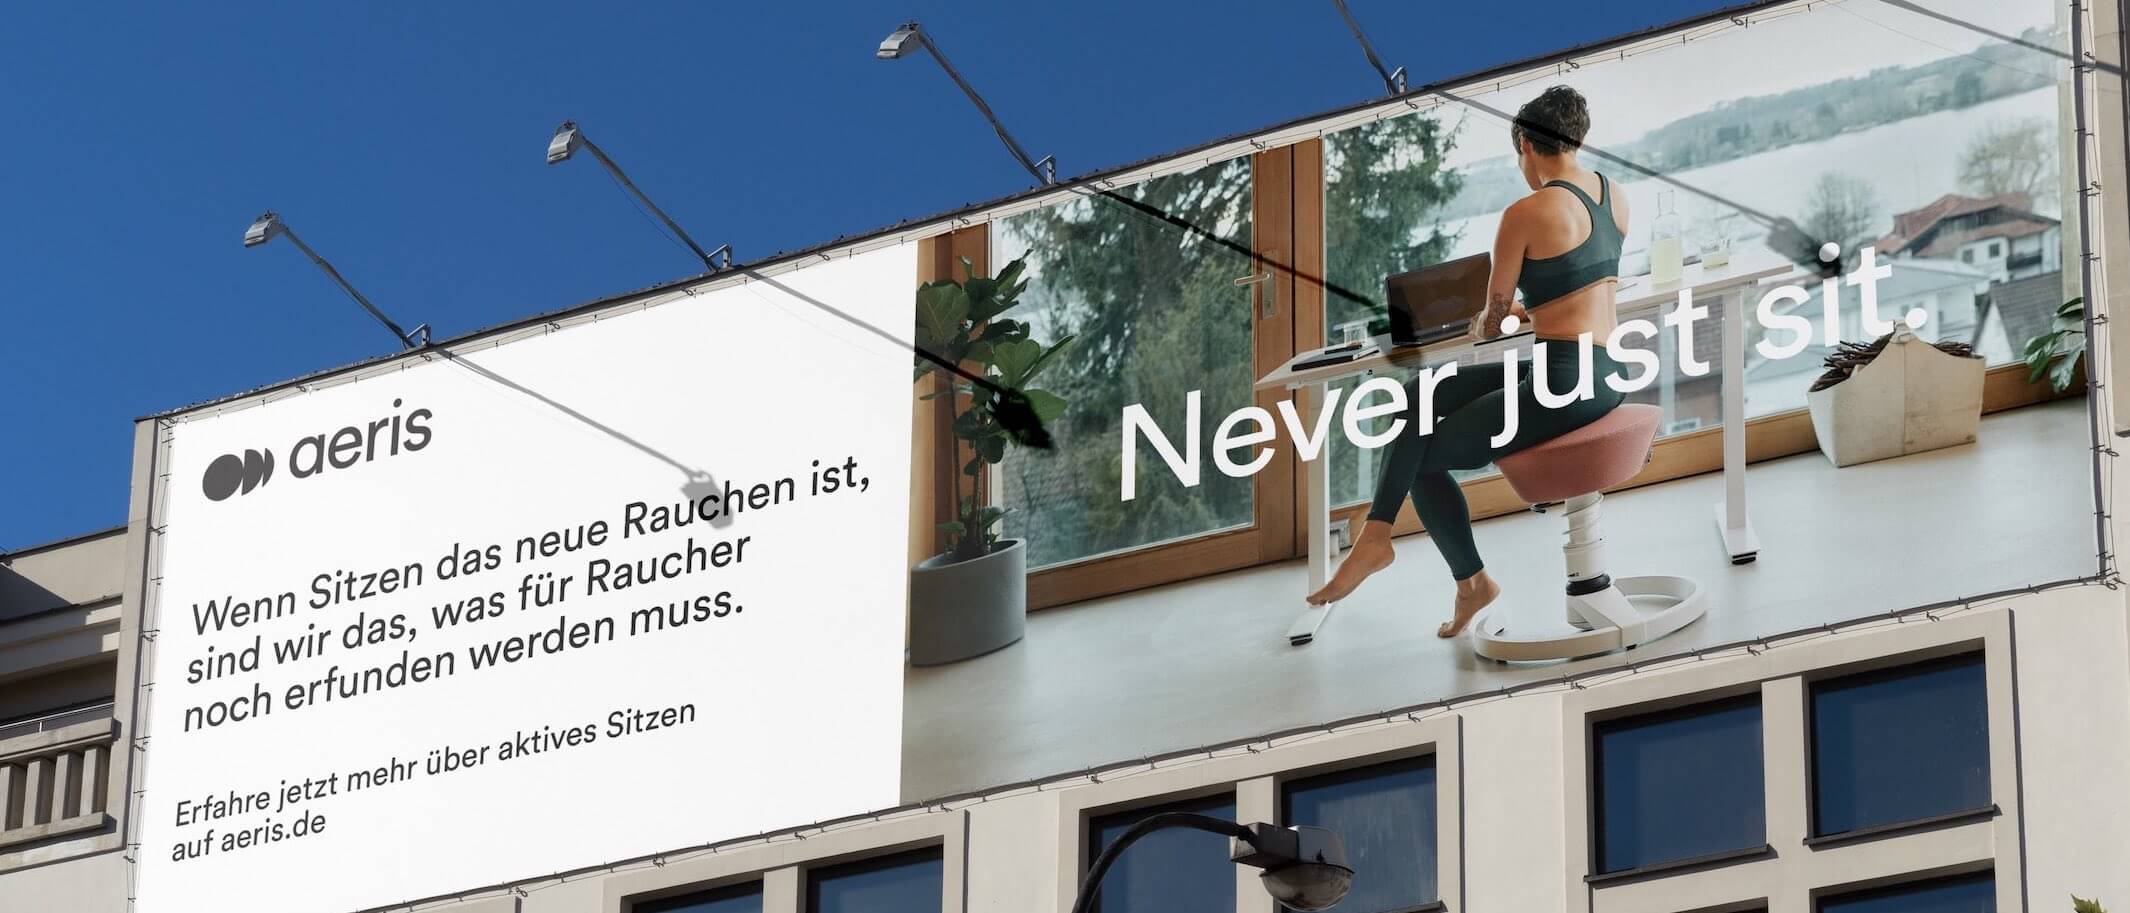 Aeris Brand Kampagne 2022. Großes Out of Home Plakat an Gebäude.